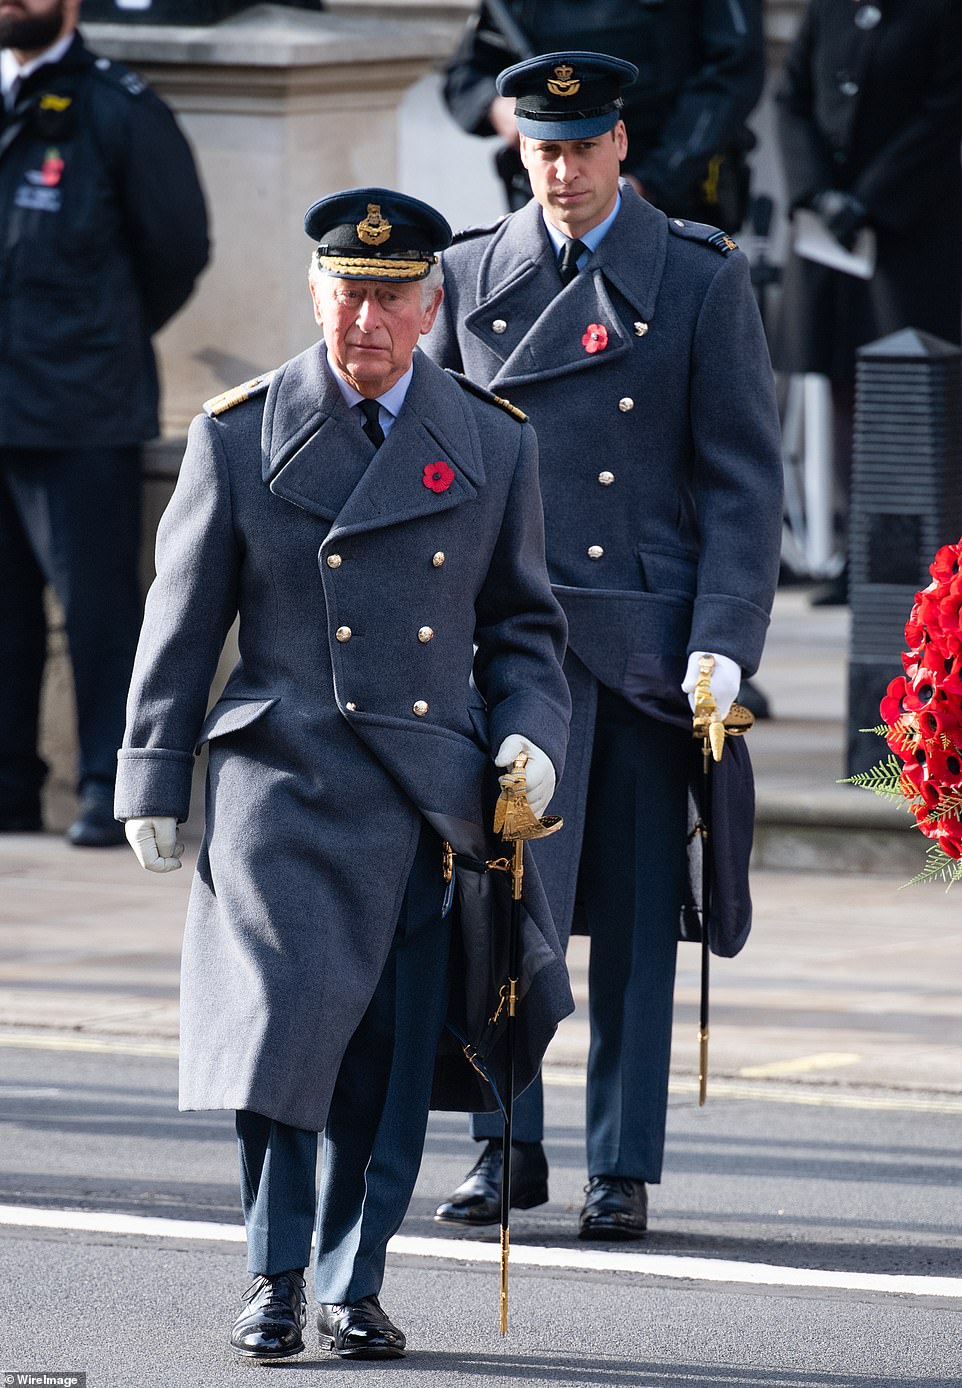 Prince Charles has attempted to keep family relations civil, refusing even to discuss the issue. Pictured: Prince Charles and Prince William at the Cenotaph on Remembrance Sunday